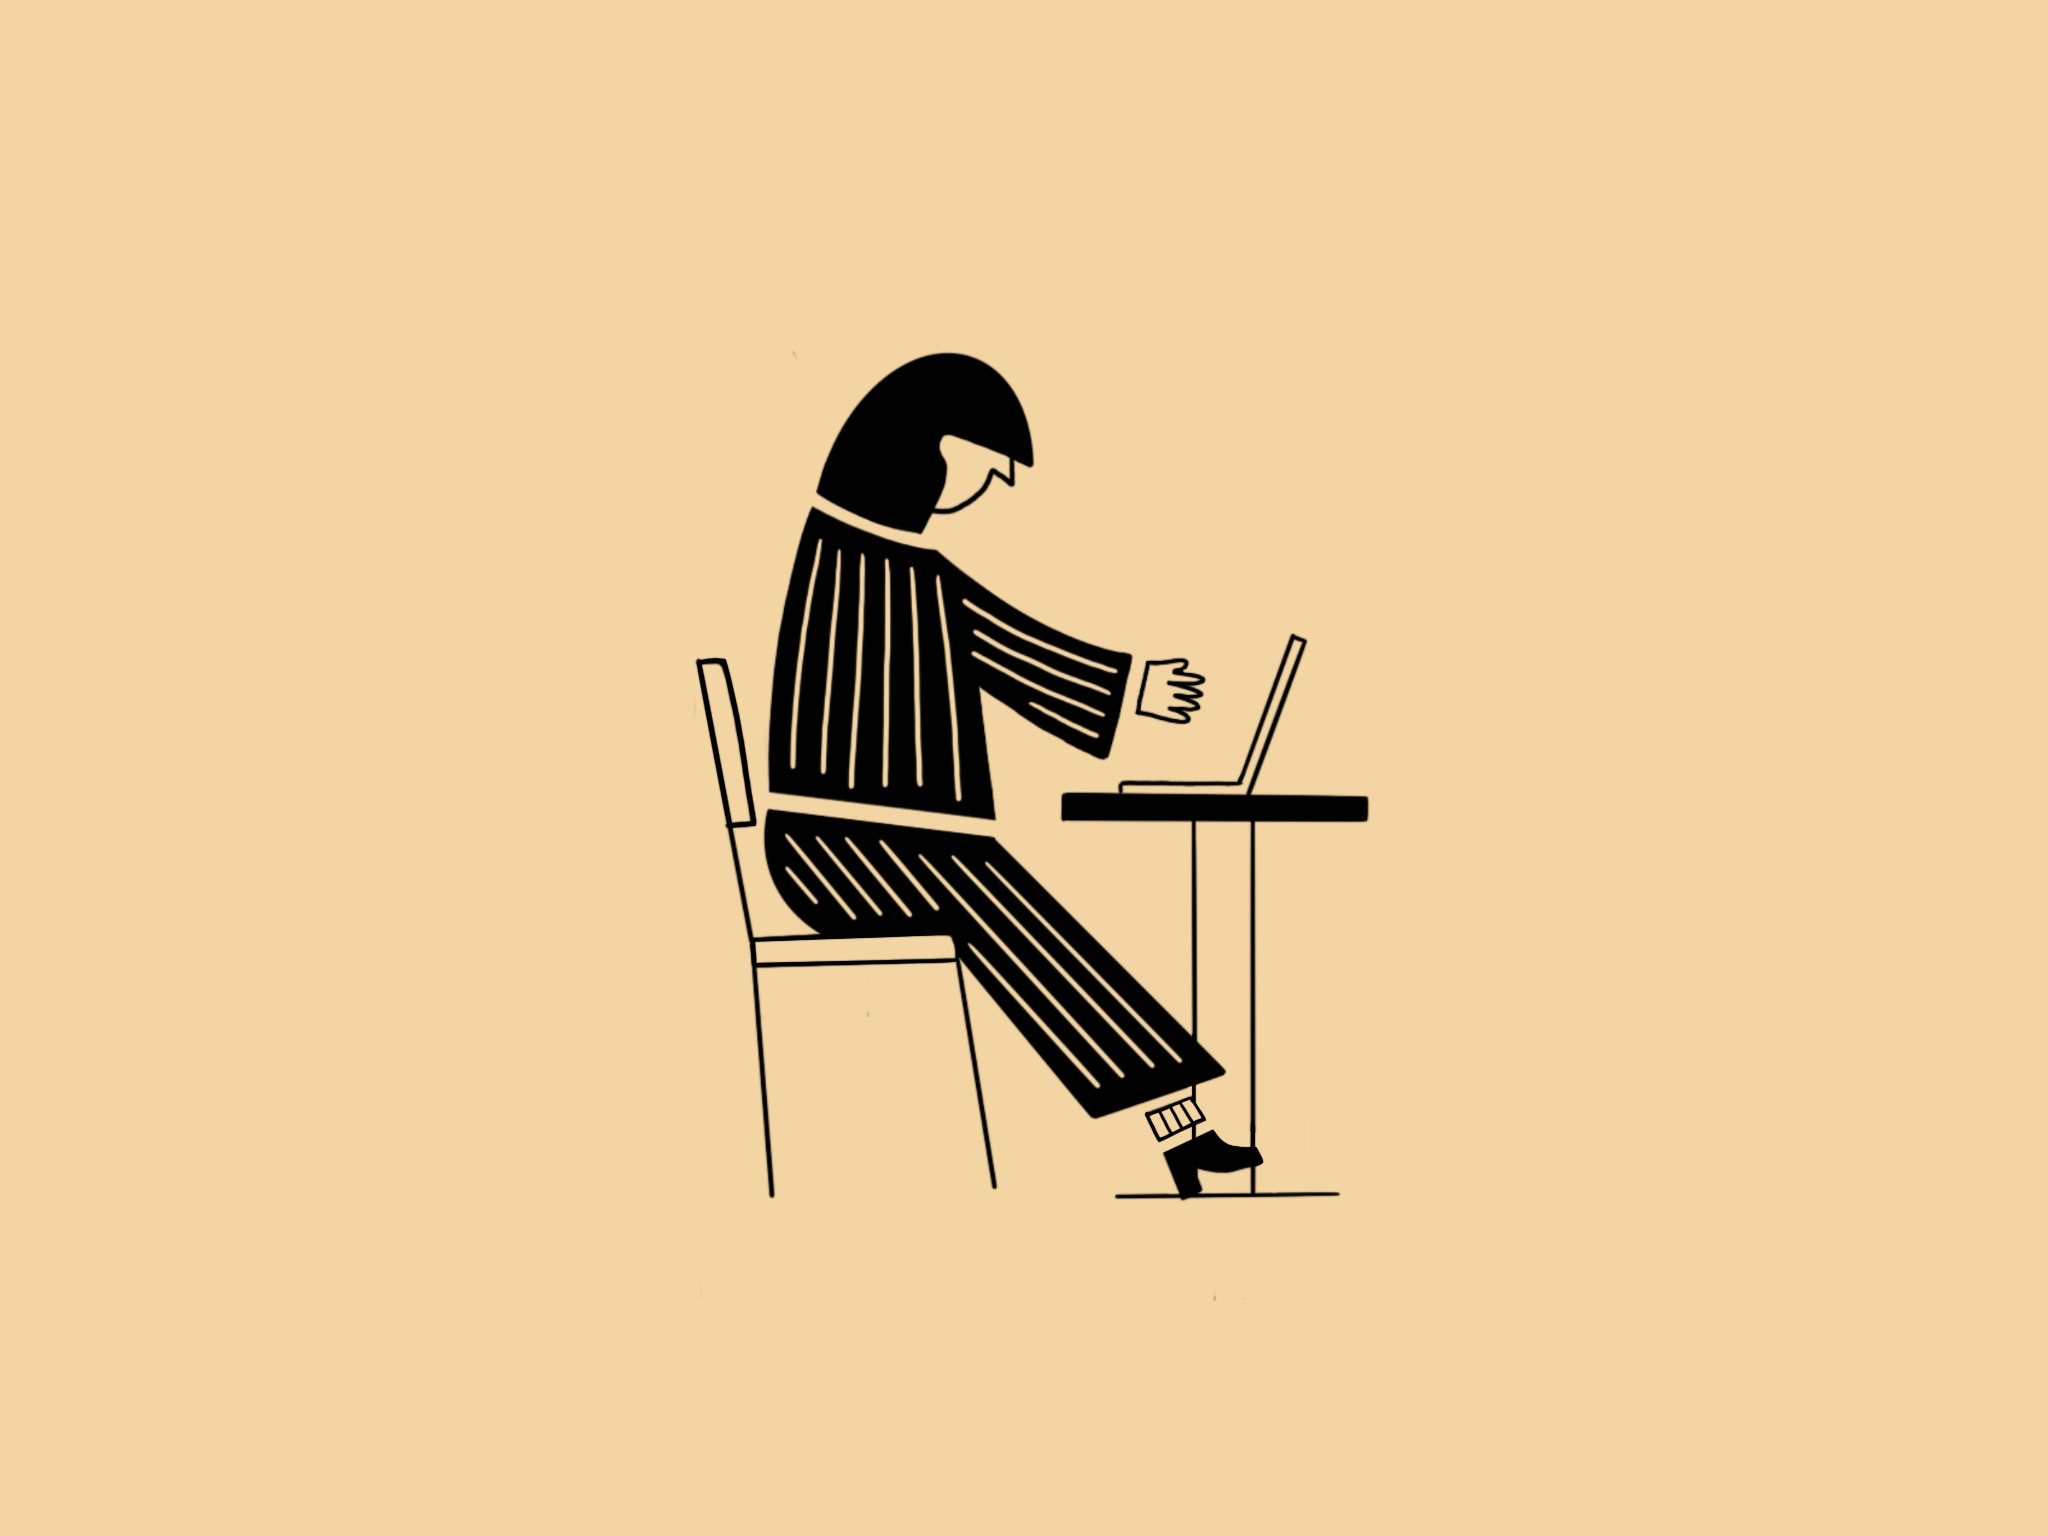 Illustration of a figure sitting at a table, working on a laptop.